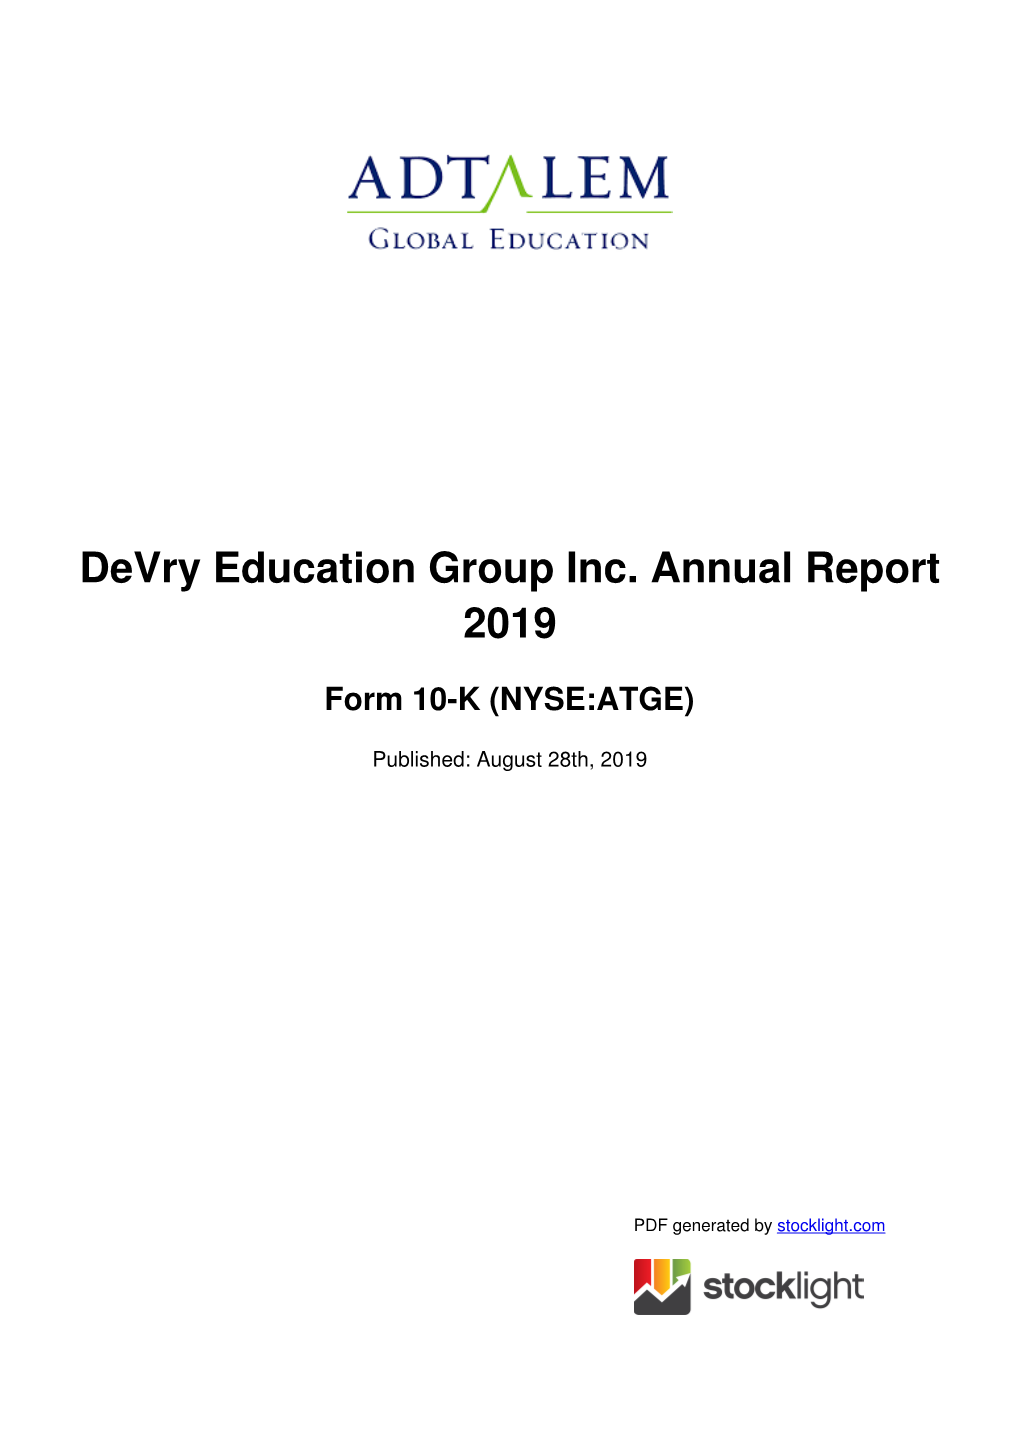 Devry Education Group Inc. Annual Report 2019